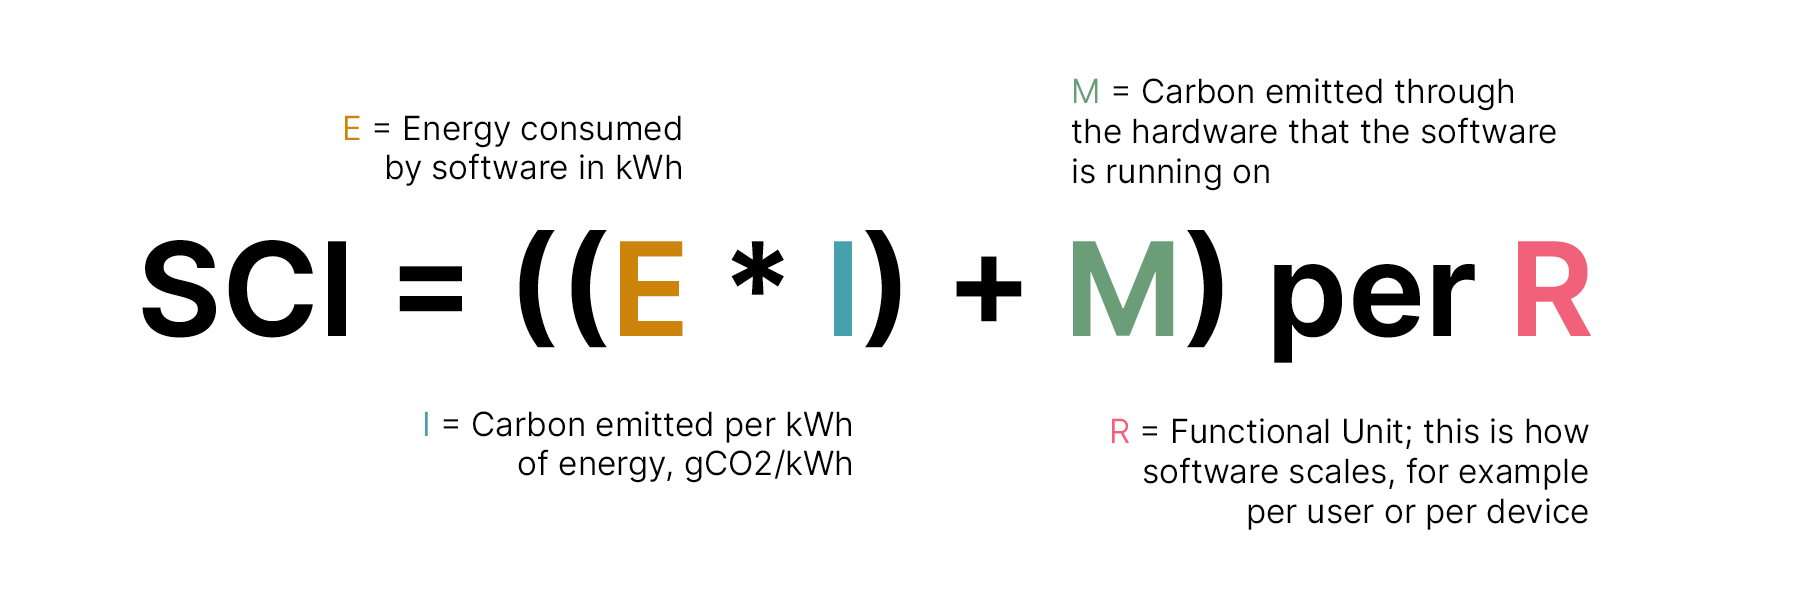 Visual of the formula to calculate Software carbon intensity: energy consumed times carbon emitted by software, plus emissions by hardware, per functional unit